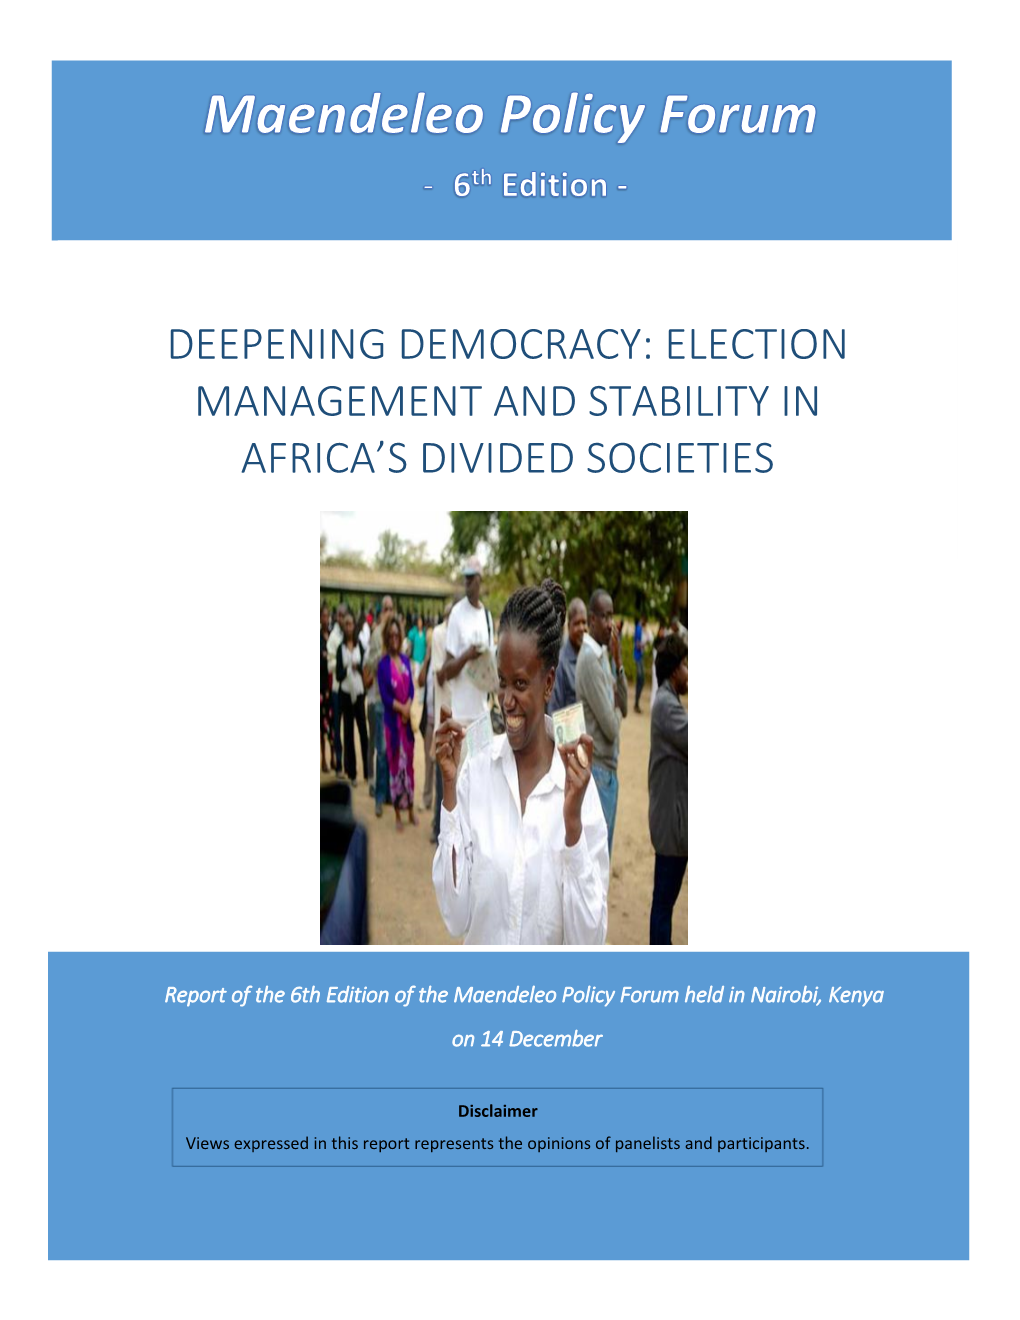 Deepening Democracy: Election Management and Stability in Africa’S Divided Societies